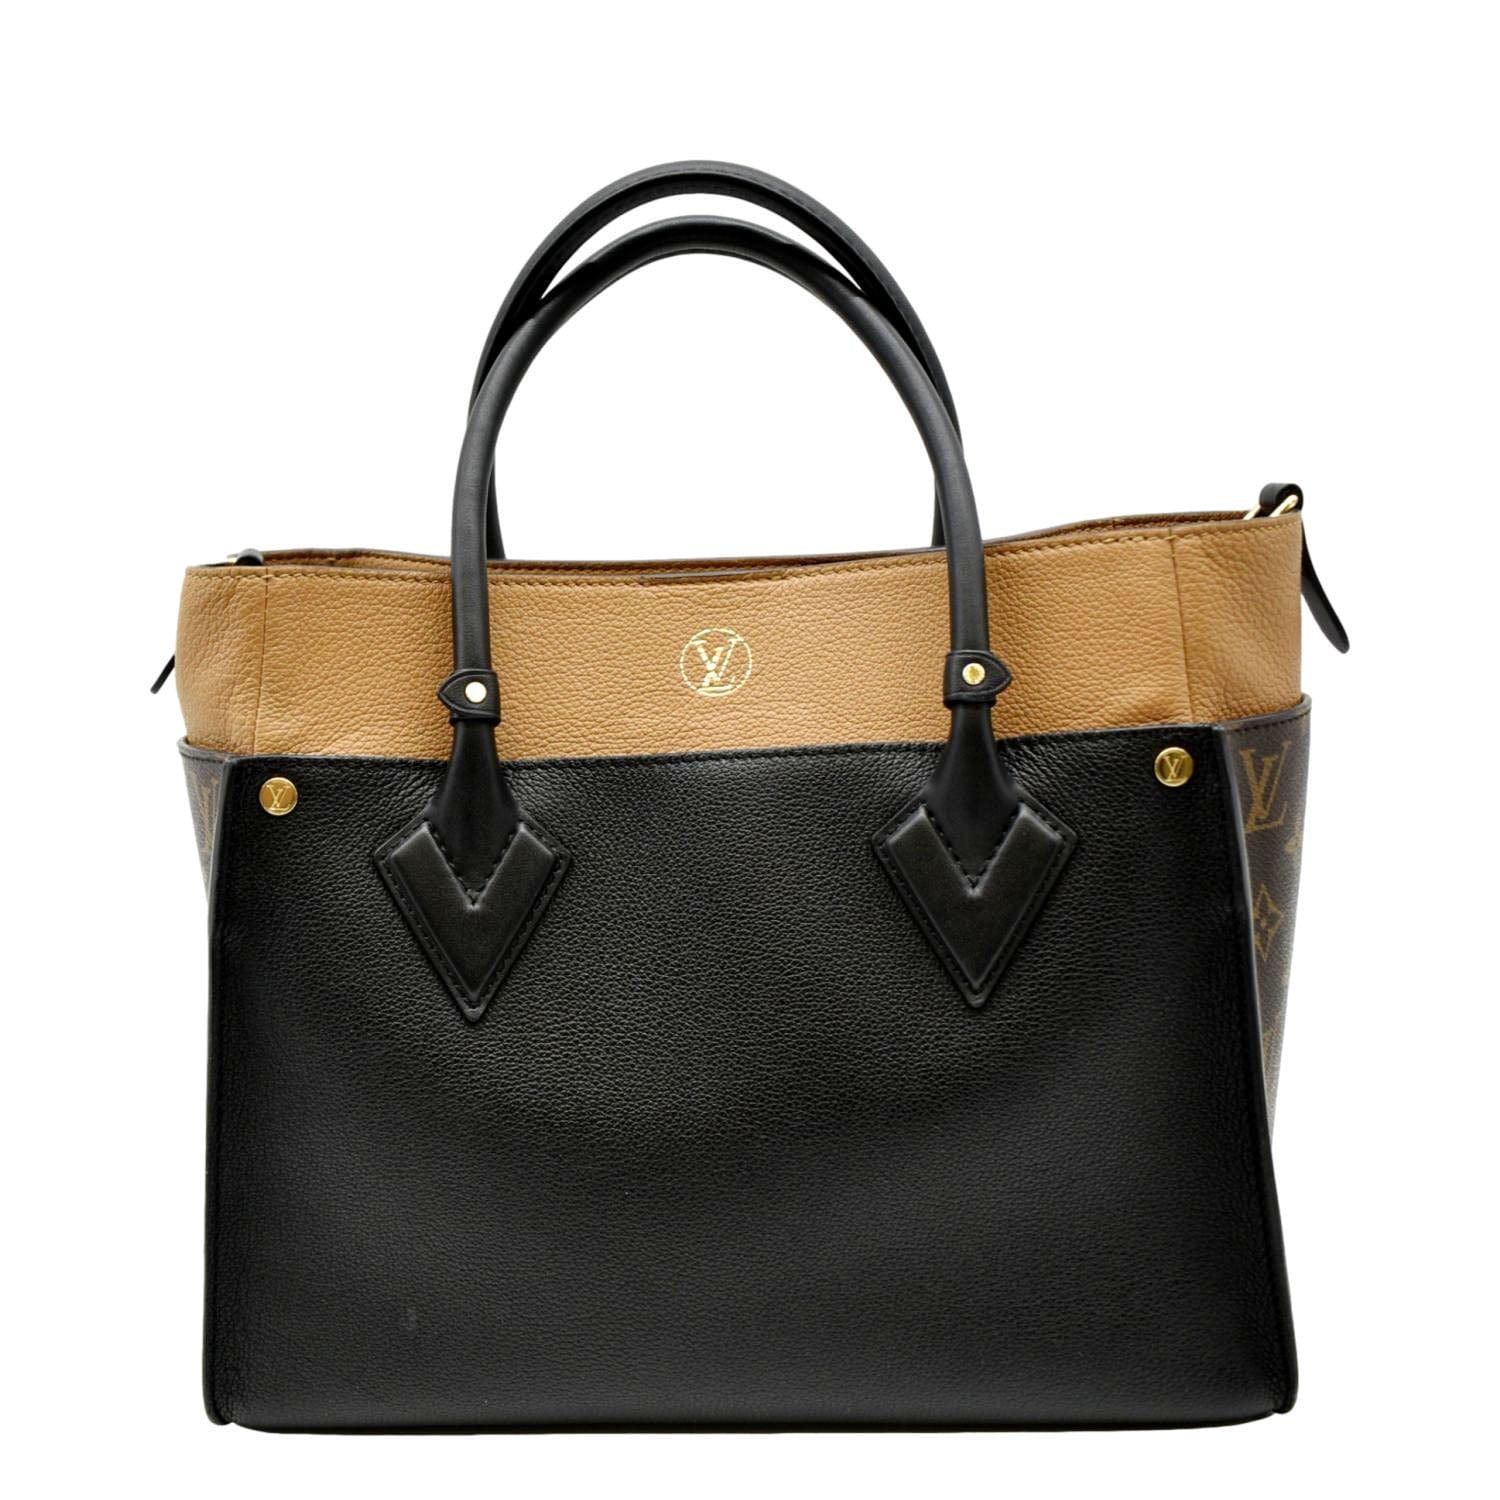 Louis Vuitton Black Leather and Monogram on My Side PM Tote Bag